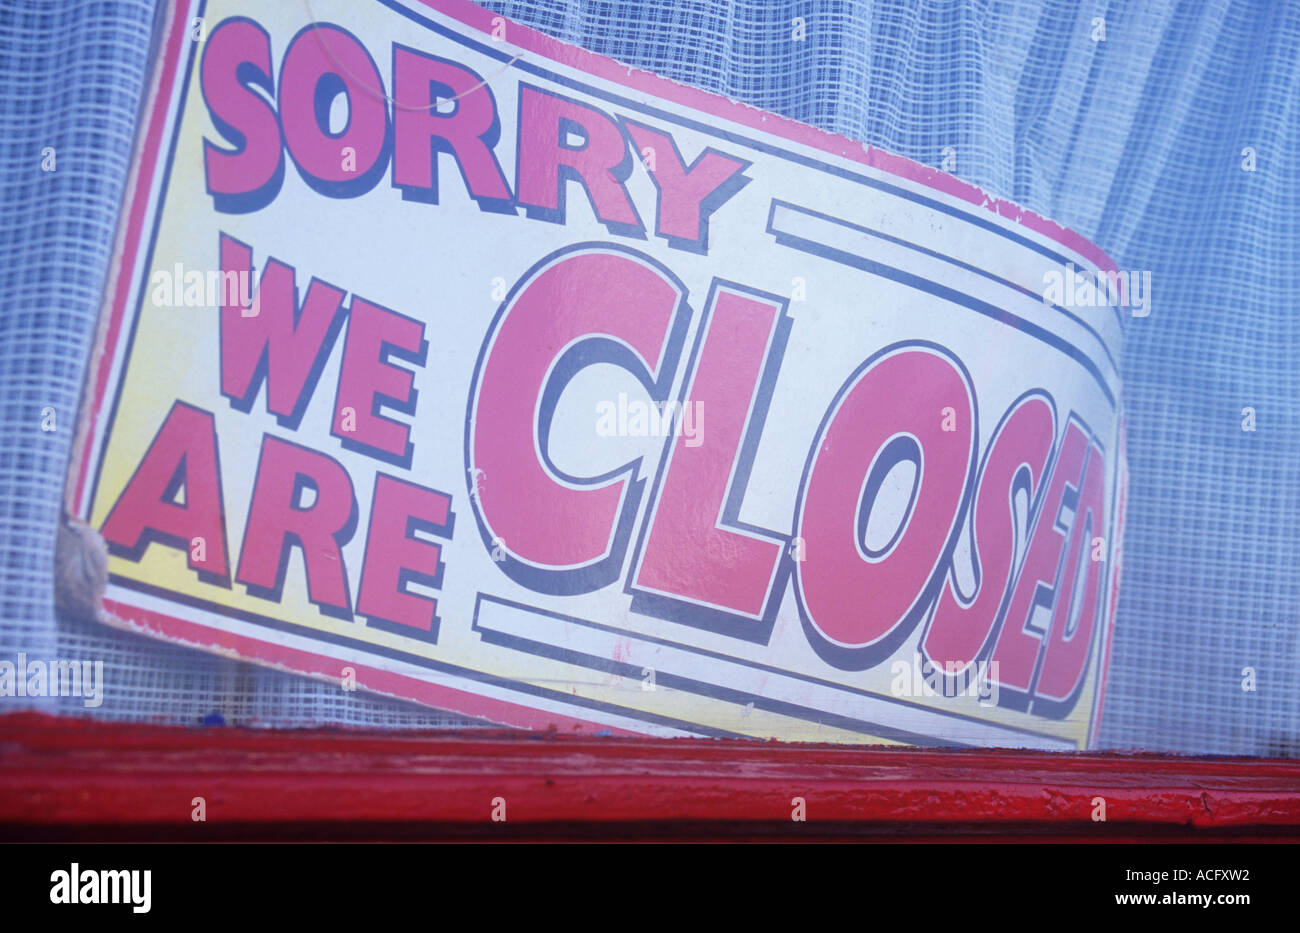 Close up of faded and curled red and yellow sign in a shop or kiosk or cafe window with net curtain stating Sorry We are closed Stock Photo